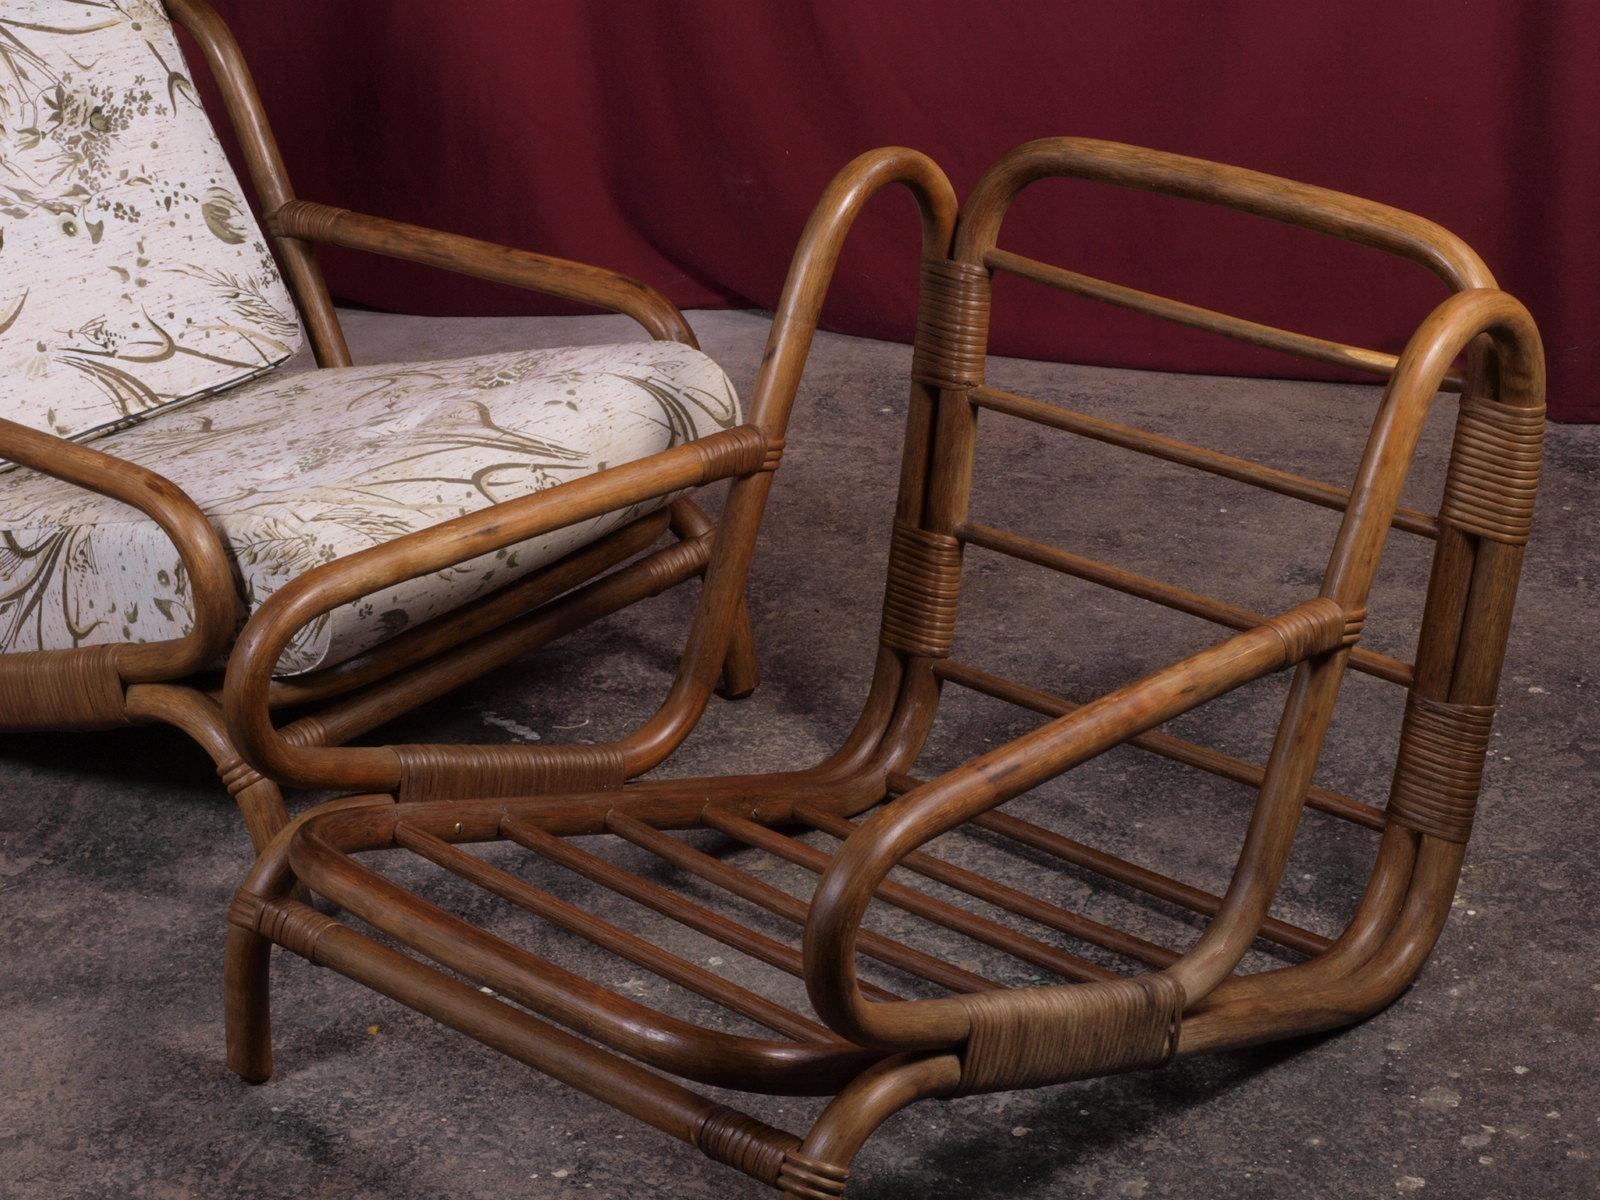 Rare Bamboo Vintage Danish Lounge Chairs, set of 2 For Sale 1